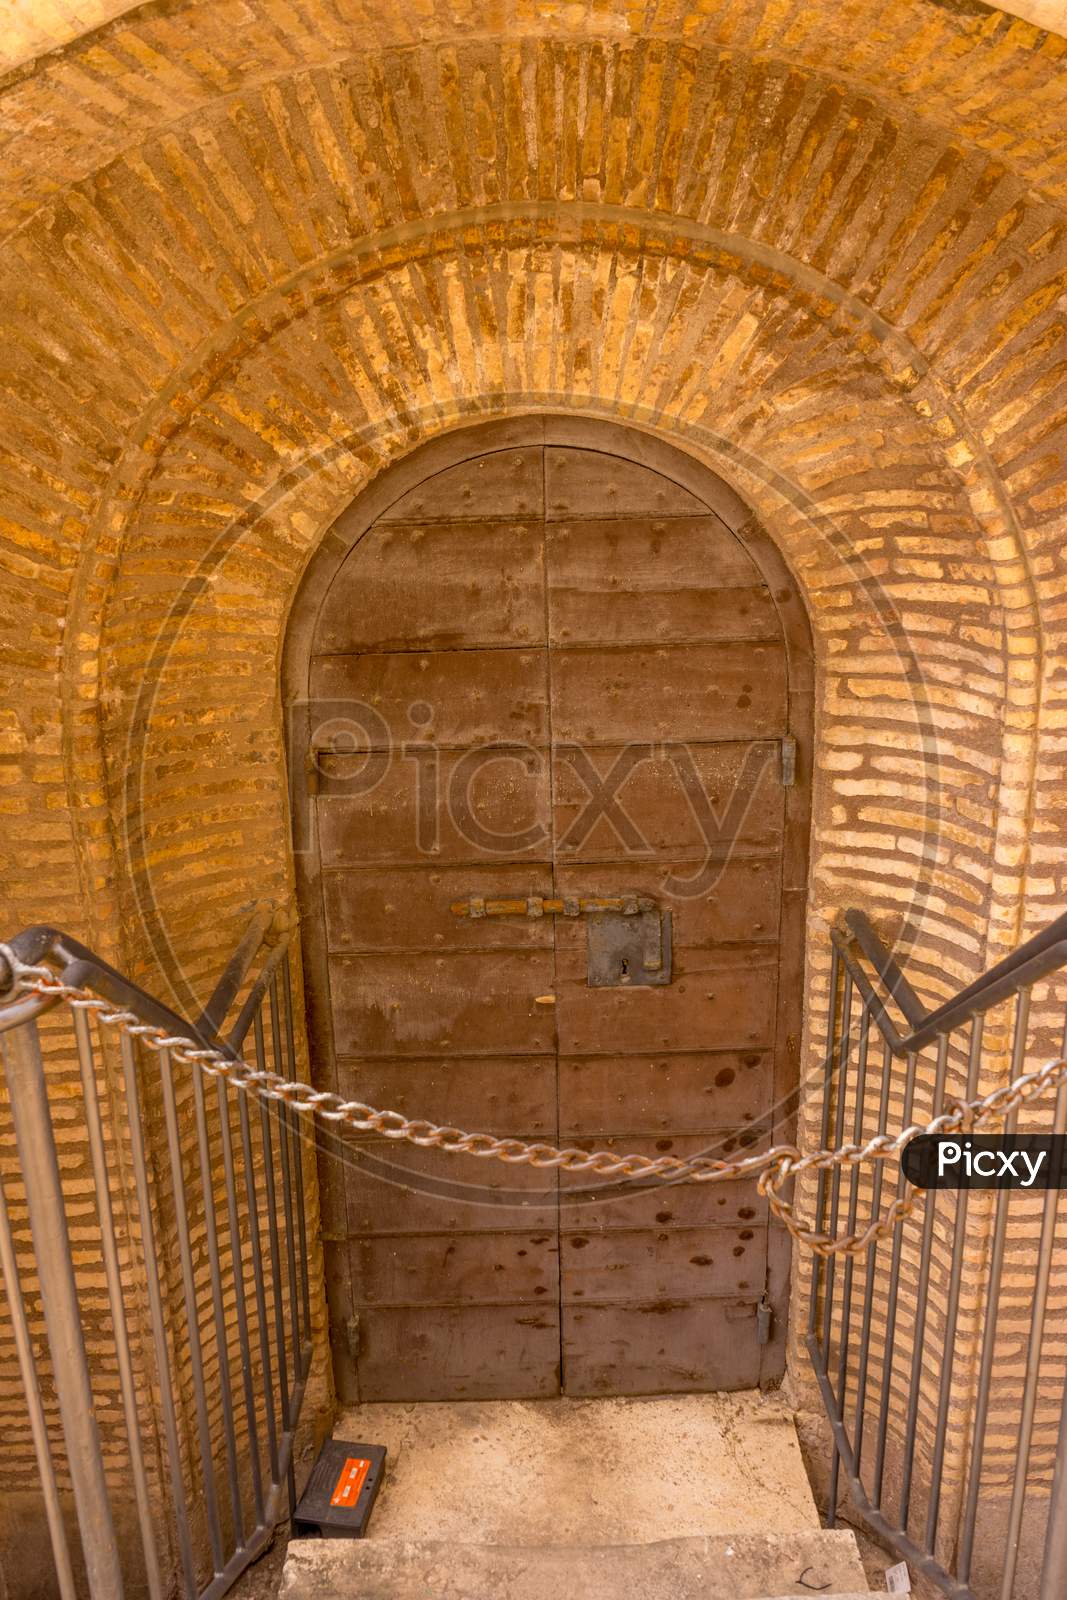 Rome, Italy - 23 June 2018:Chained Door At Castel Sant Angelo, Mausoleum Of Hadrian In Rome, Italy